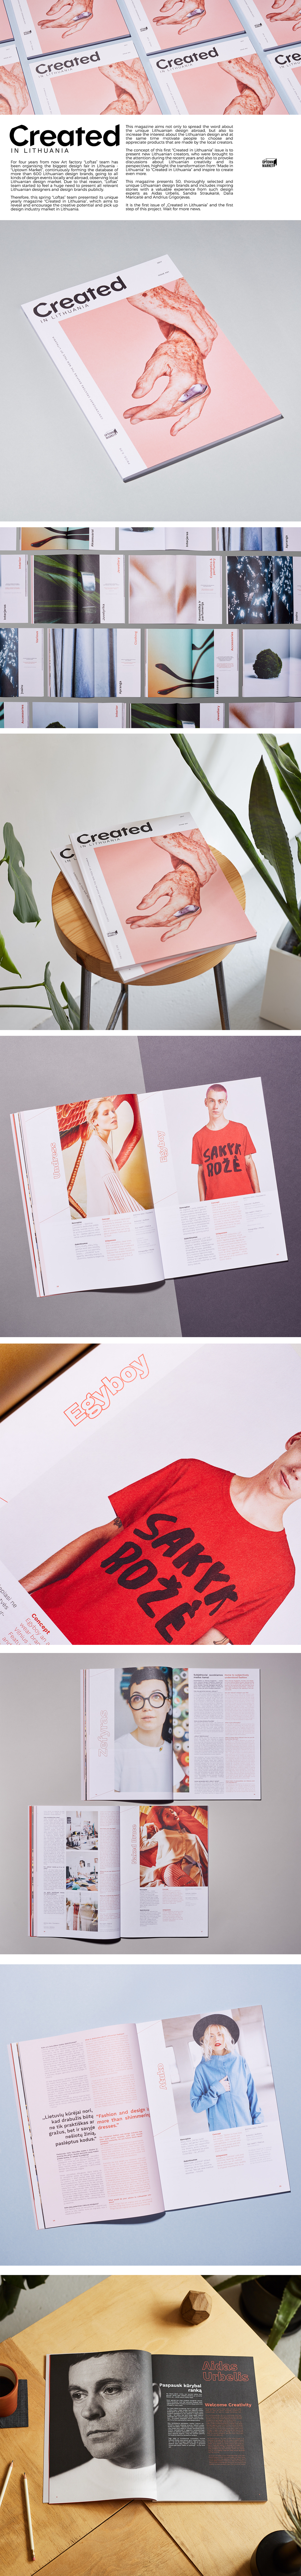 magazine editorial lithuania design pink trend top graphic design  Photography  print